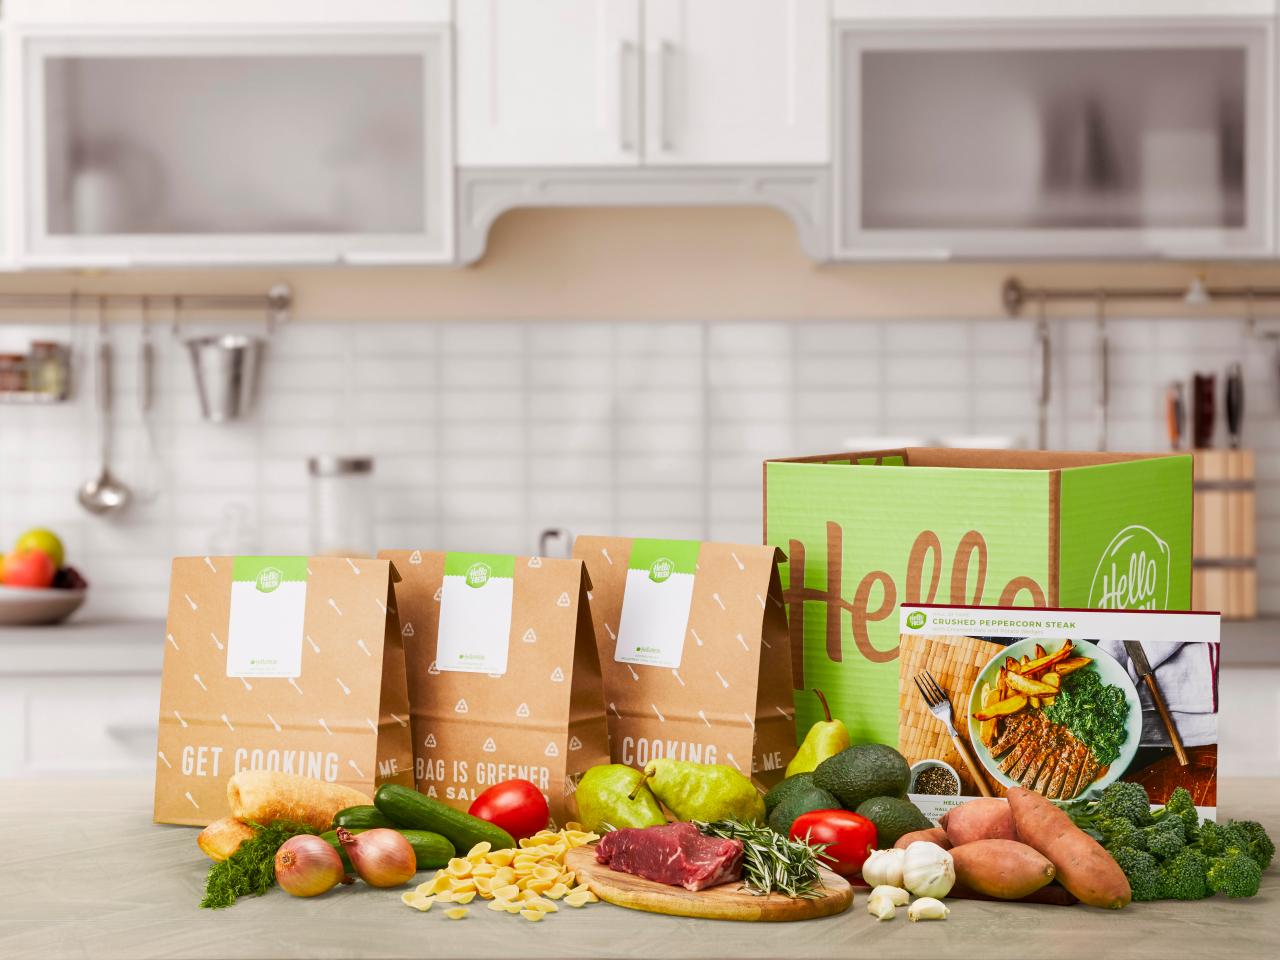 SIMPLY COOK VS HELLO FRESH  COMPARING THE RECIPE SUBSCRIPTION BOXES 